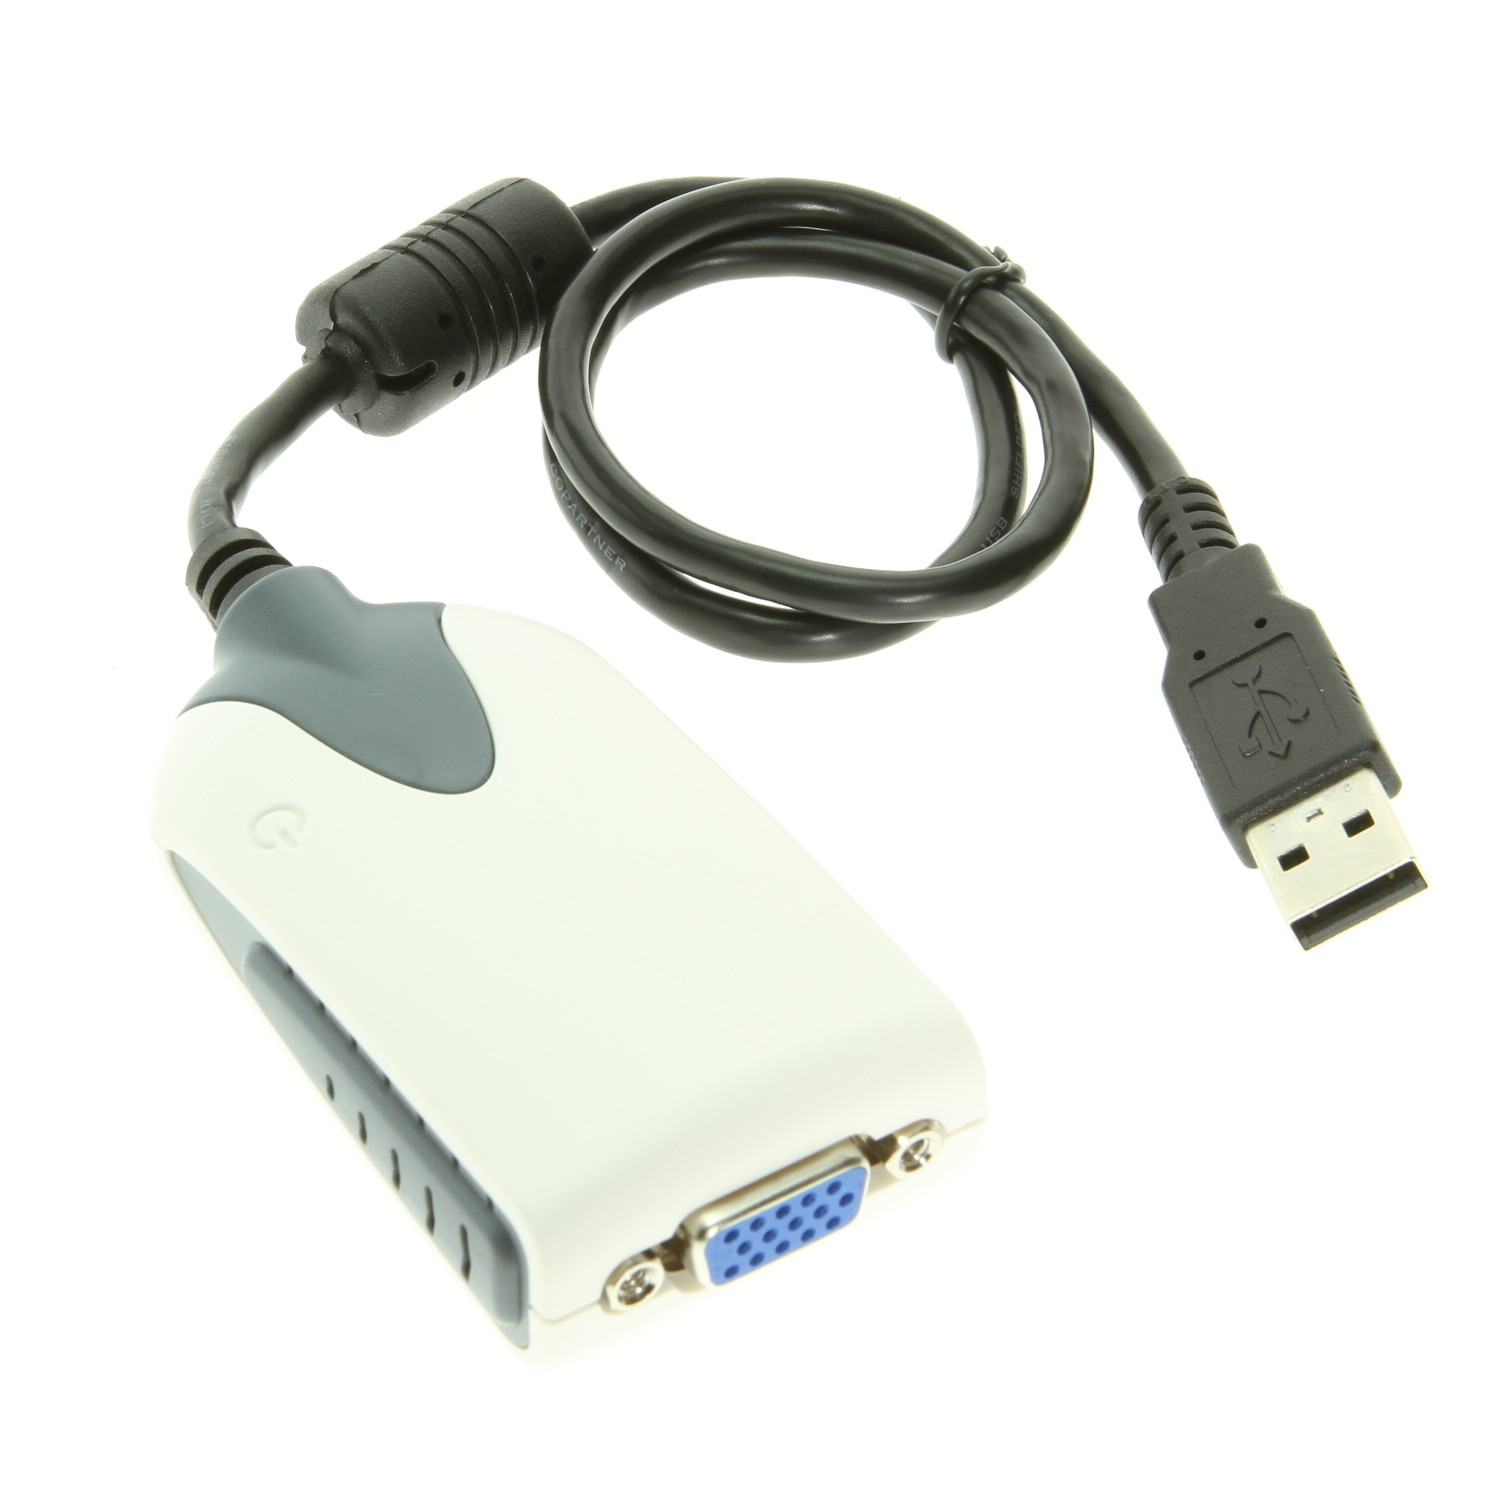 USB 2.0 Video Card Adapter SVGA for Windows - Coolgear